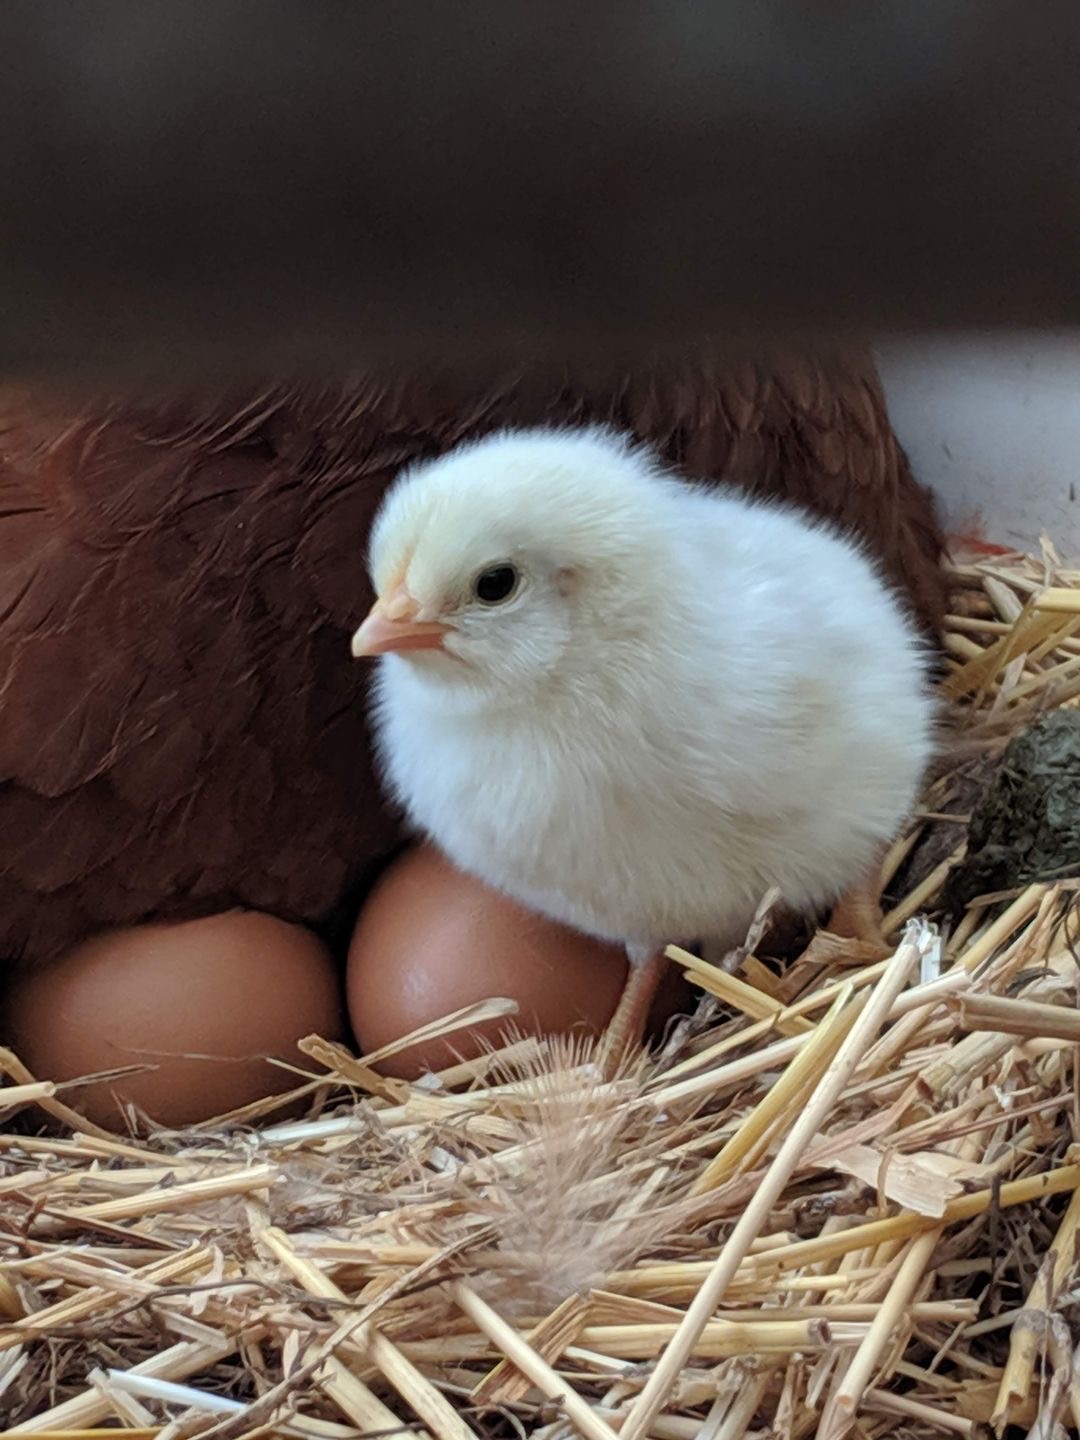 Baby chick in a bird's nest.